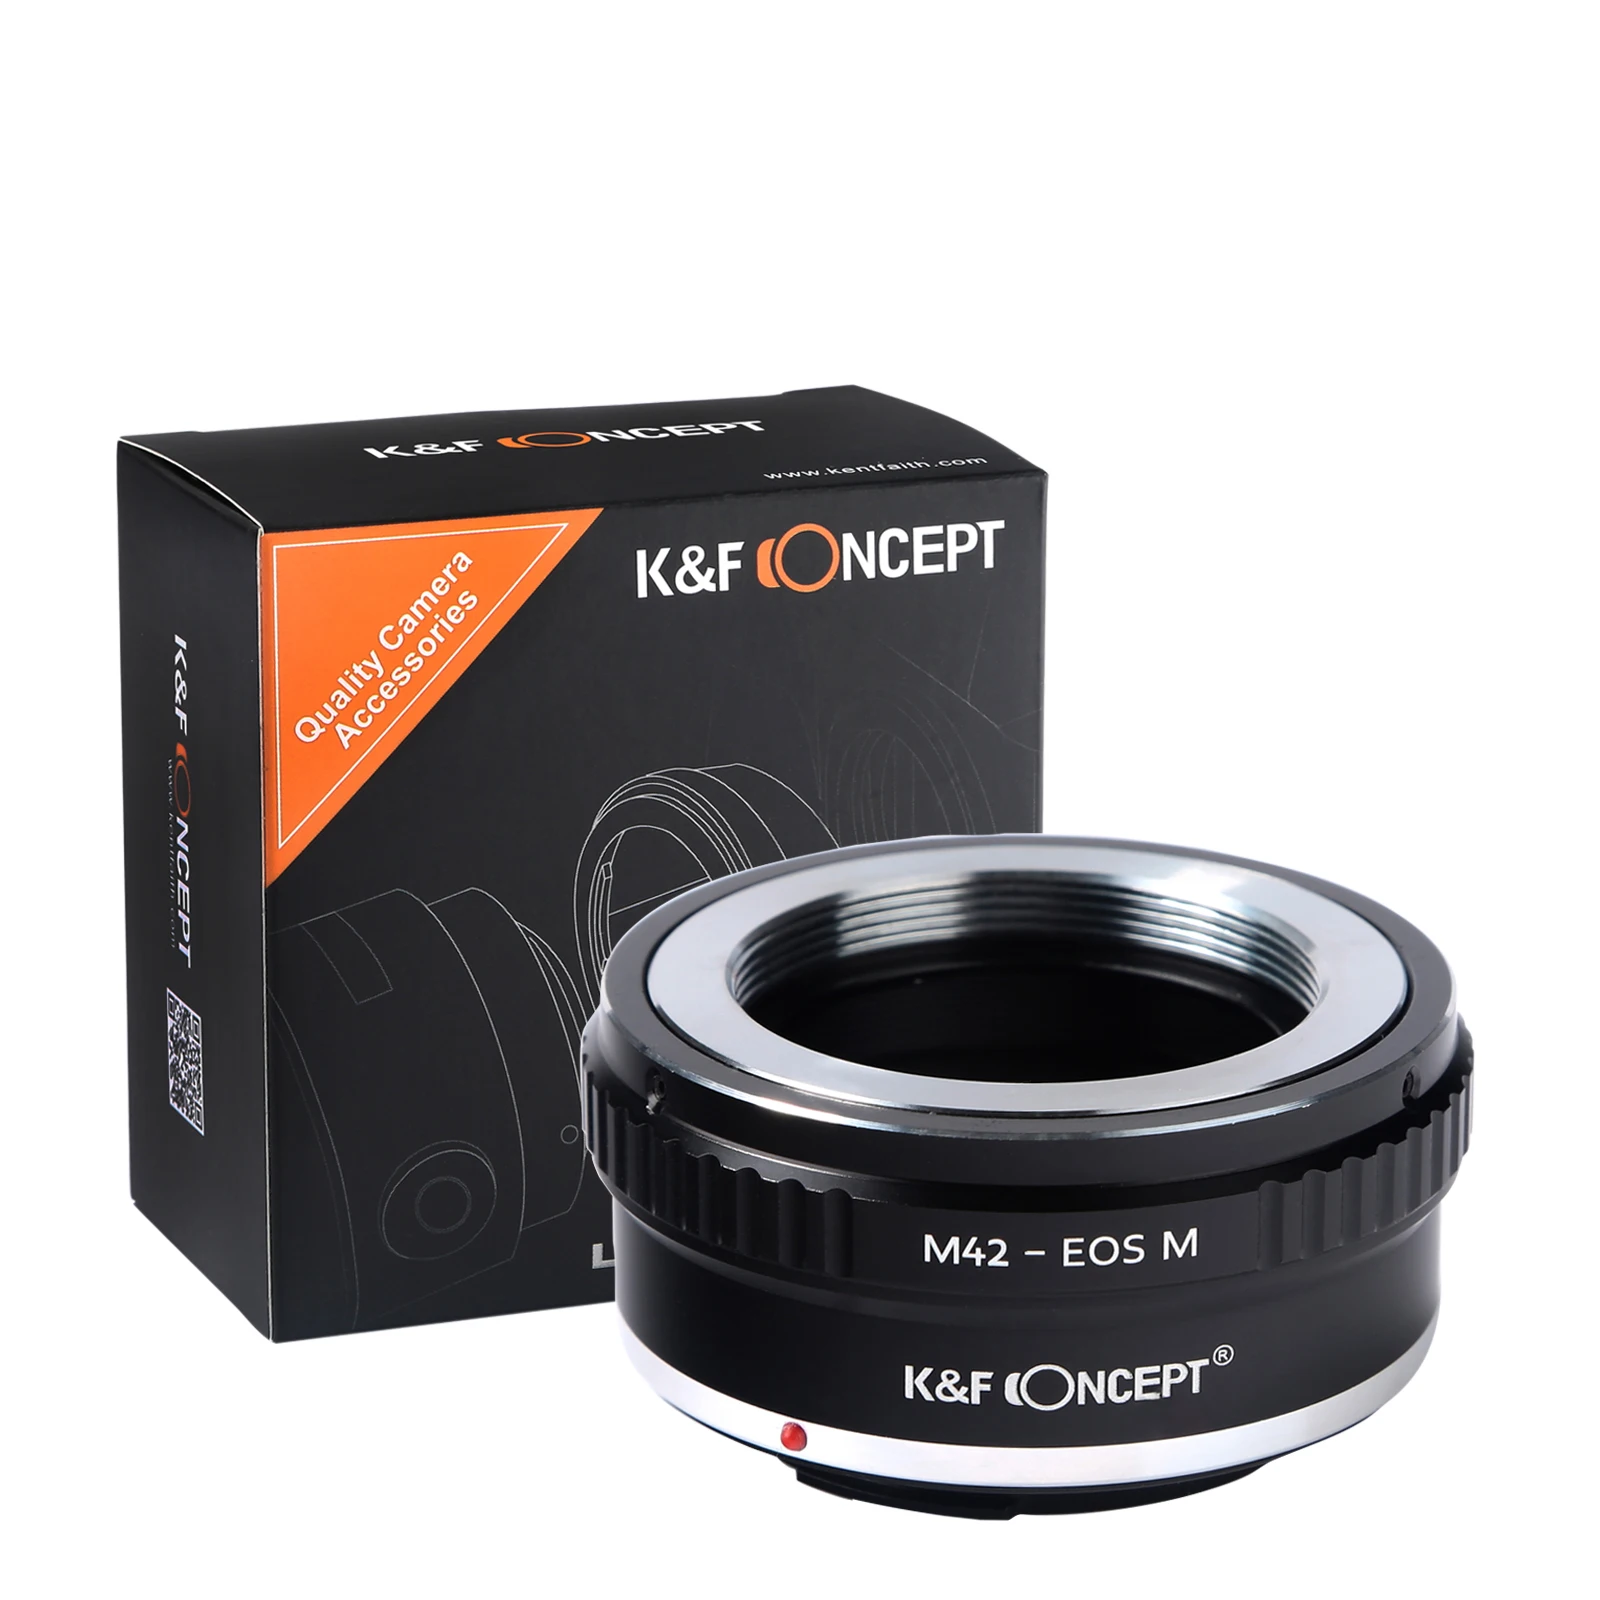 

K&F Concept Lens Adapter for M42 mount lens to Canon EOS M camera M1 M2 M3 M5 M6 M50 M100